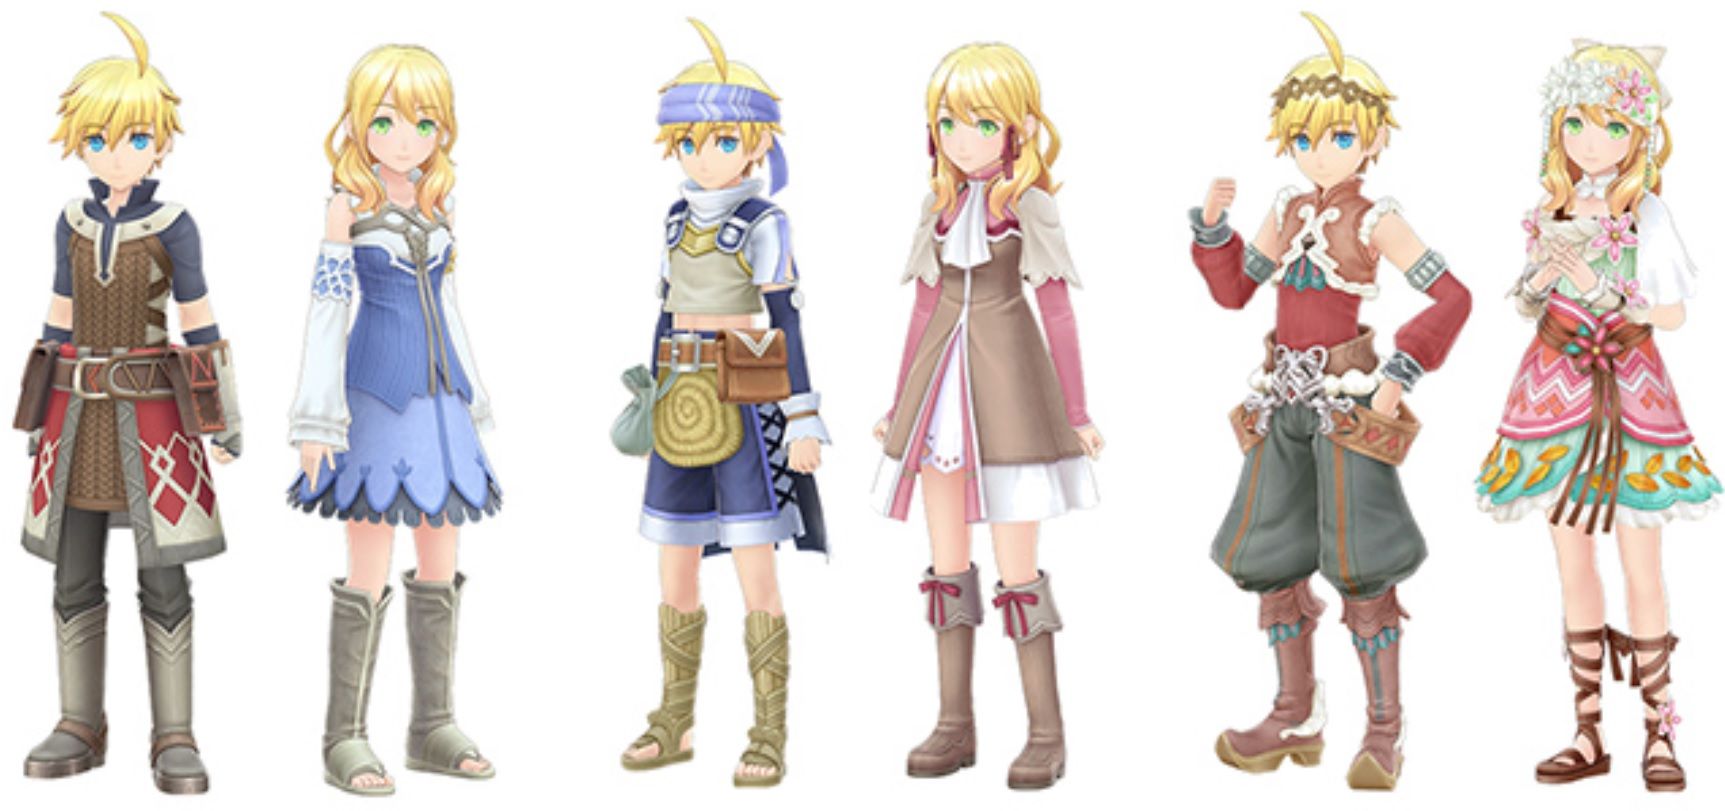 Rune Factory 5 Outfits List and How to Change.